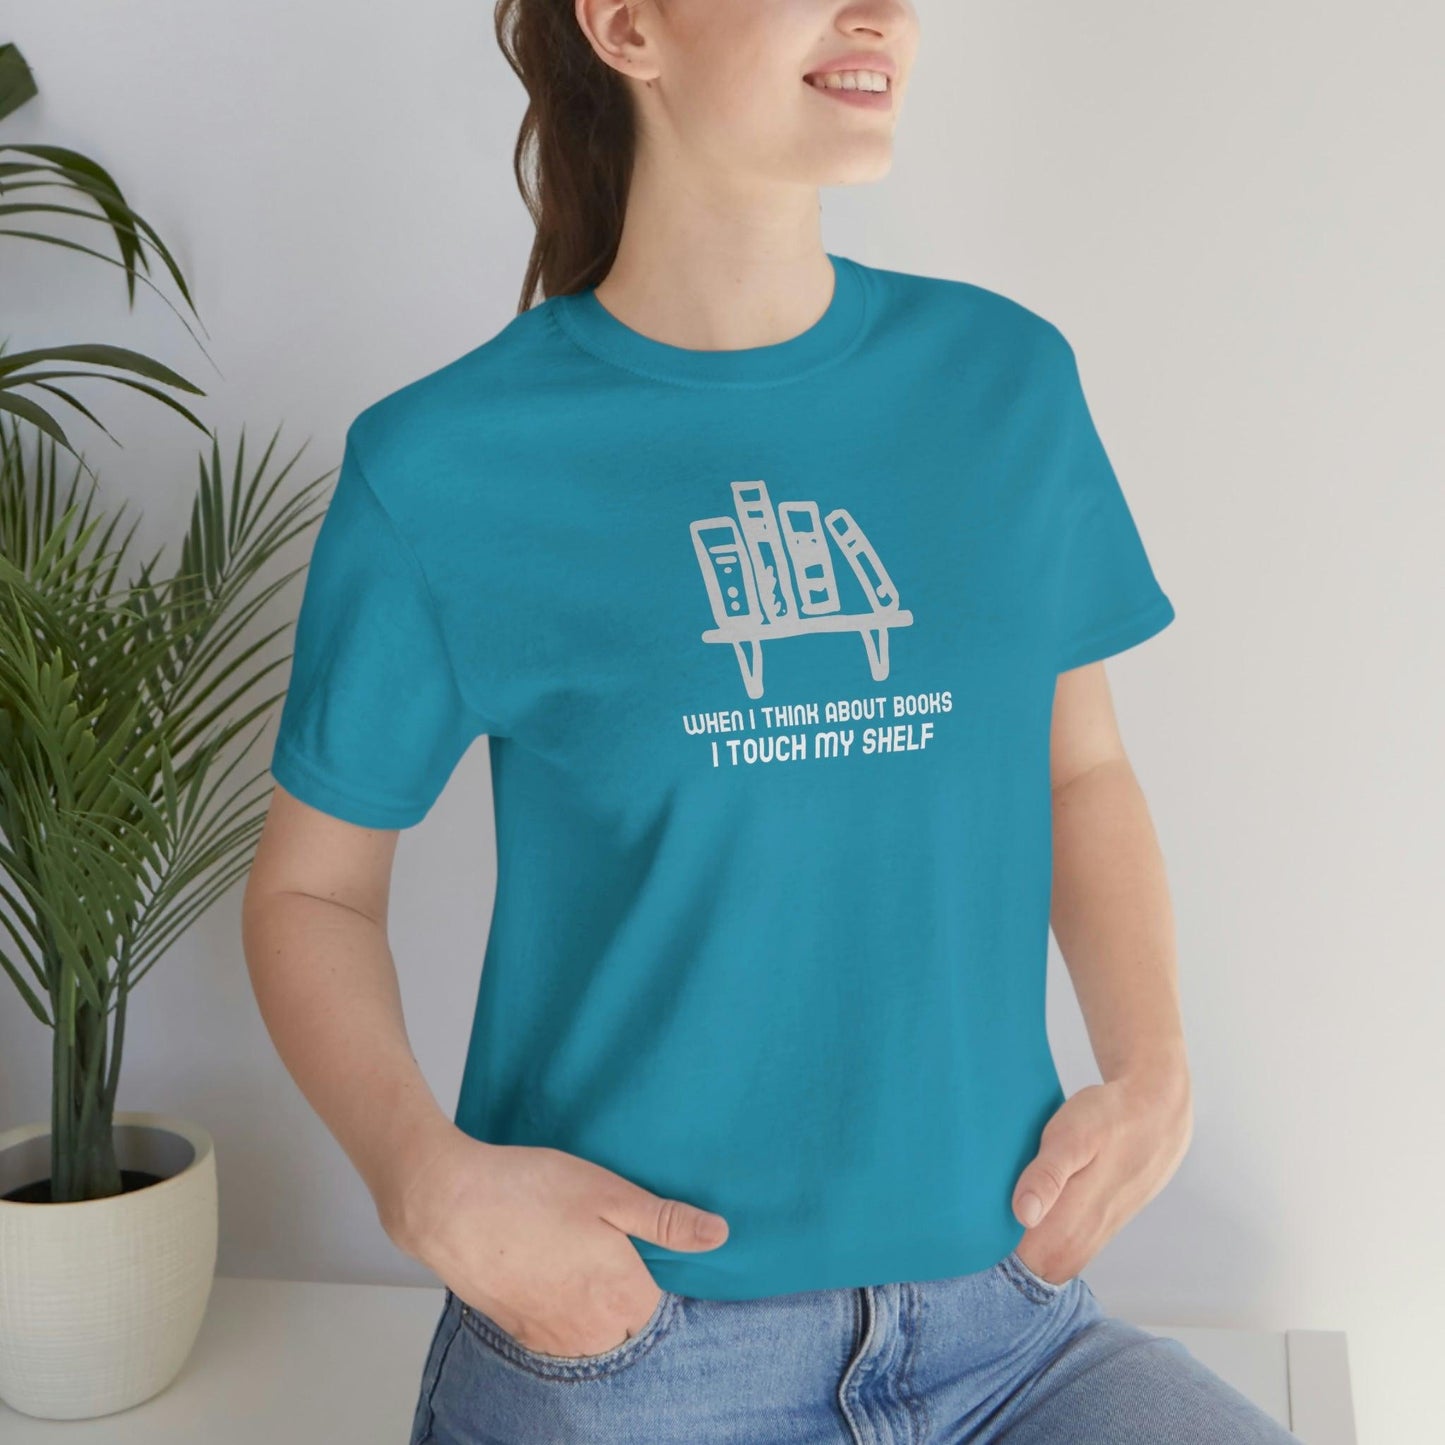 When I think about books, I touch my shelf - Wicked Naughty Apparel